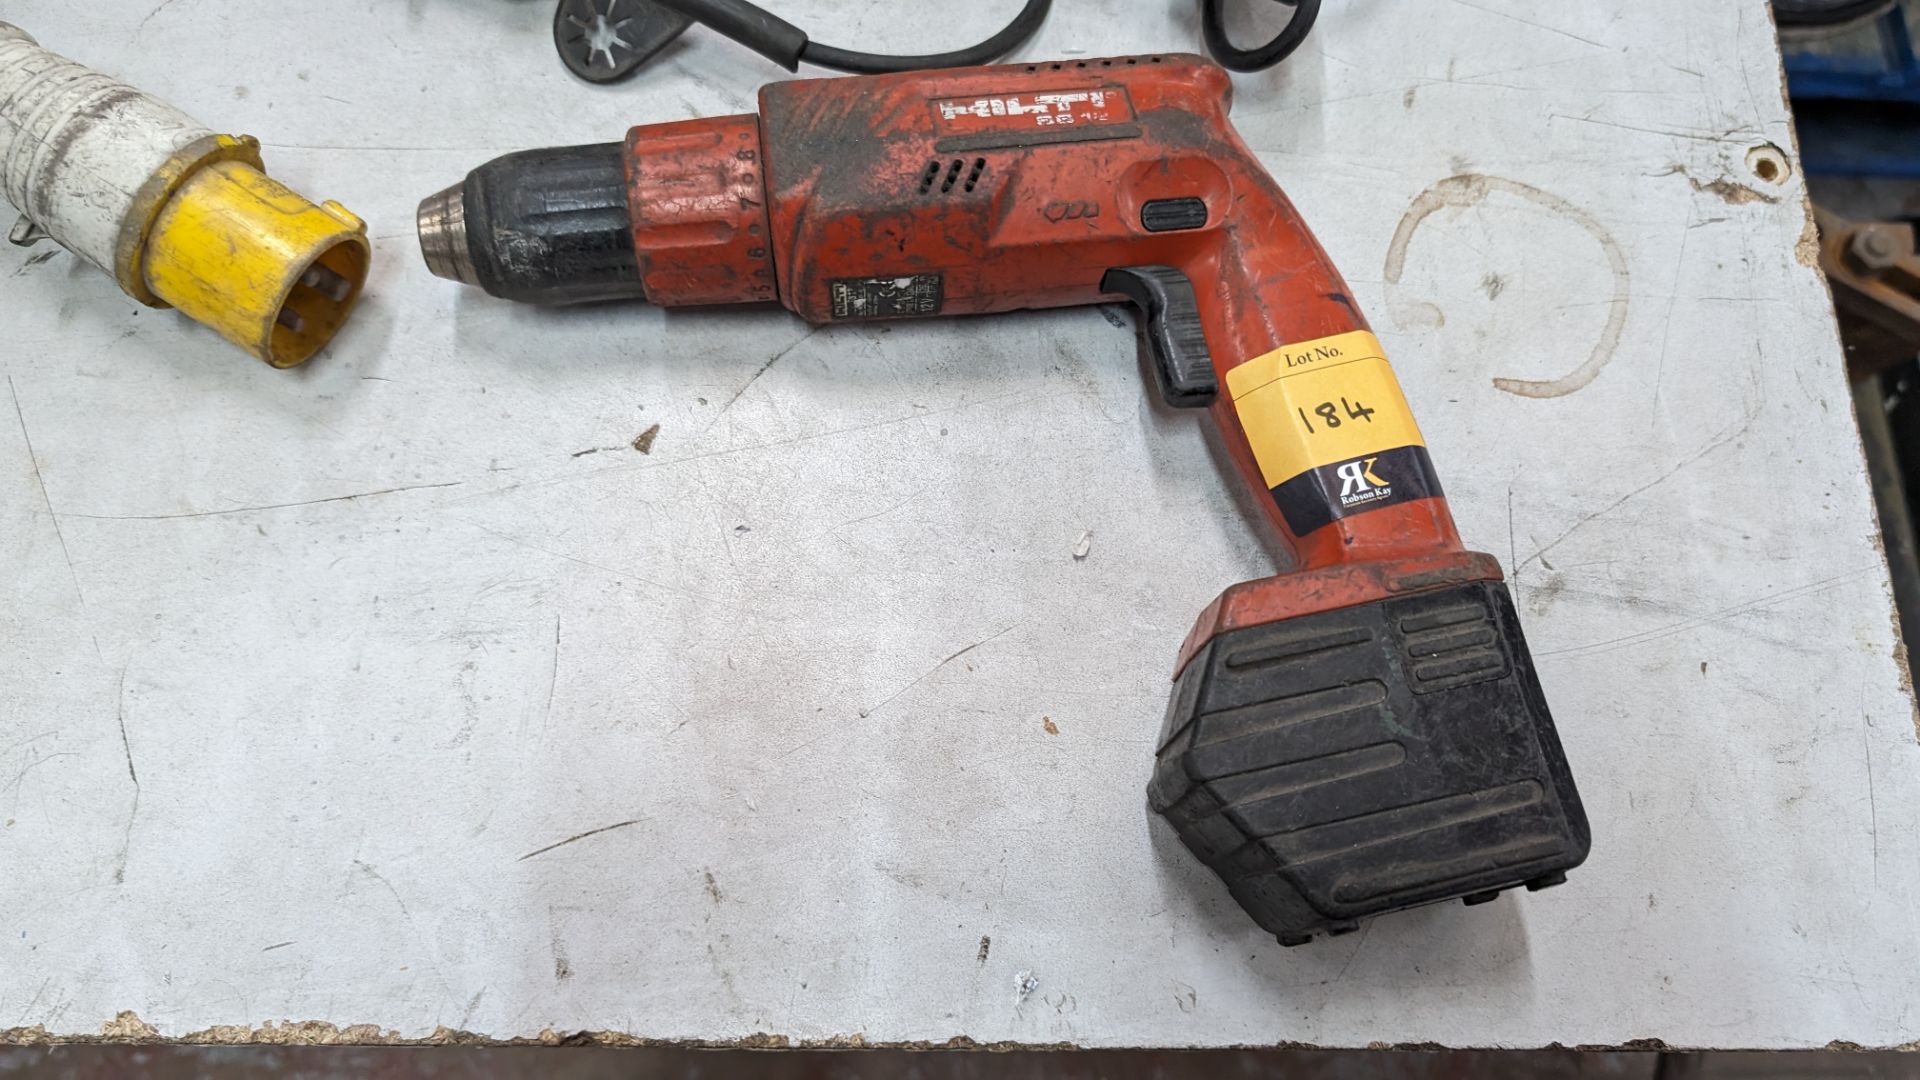 4 off assorted drills by Bosch, DeWalt & Hilti - this lot comprises 3 off 110V drills & 1 off cordle - Image 3 of 7